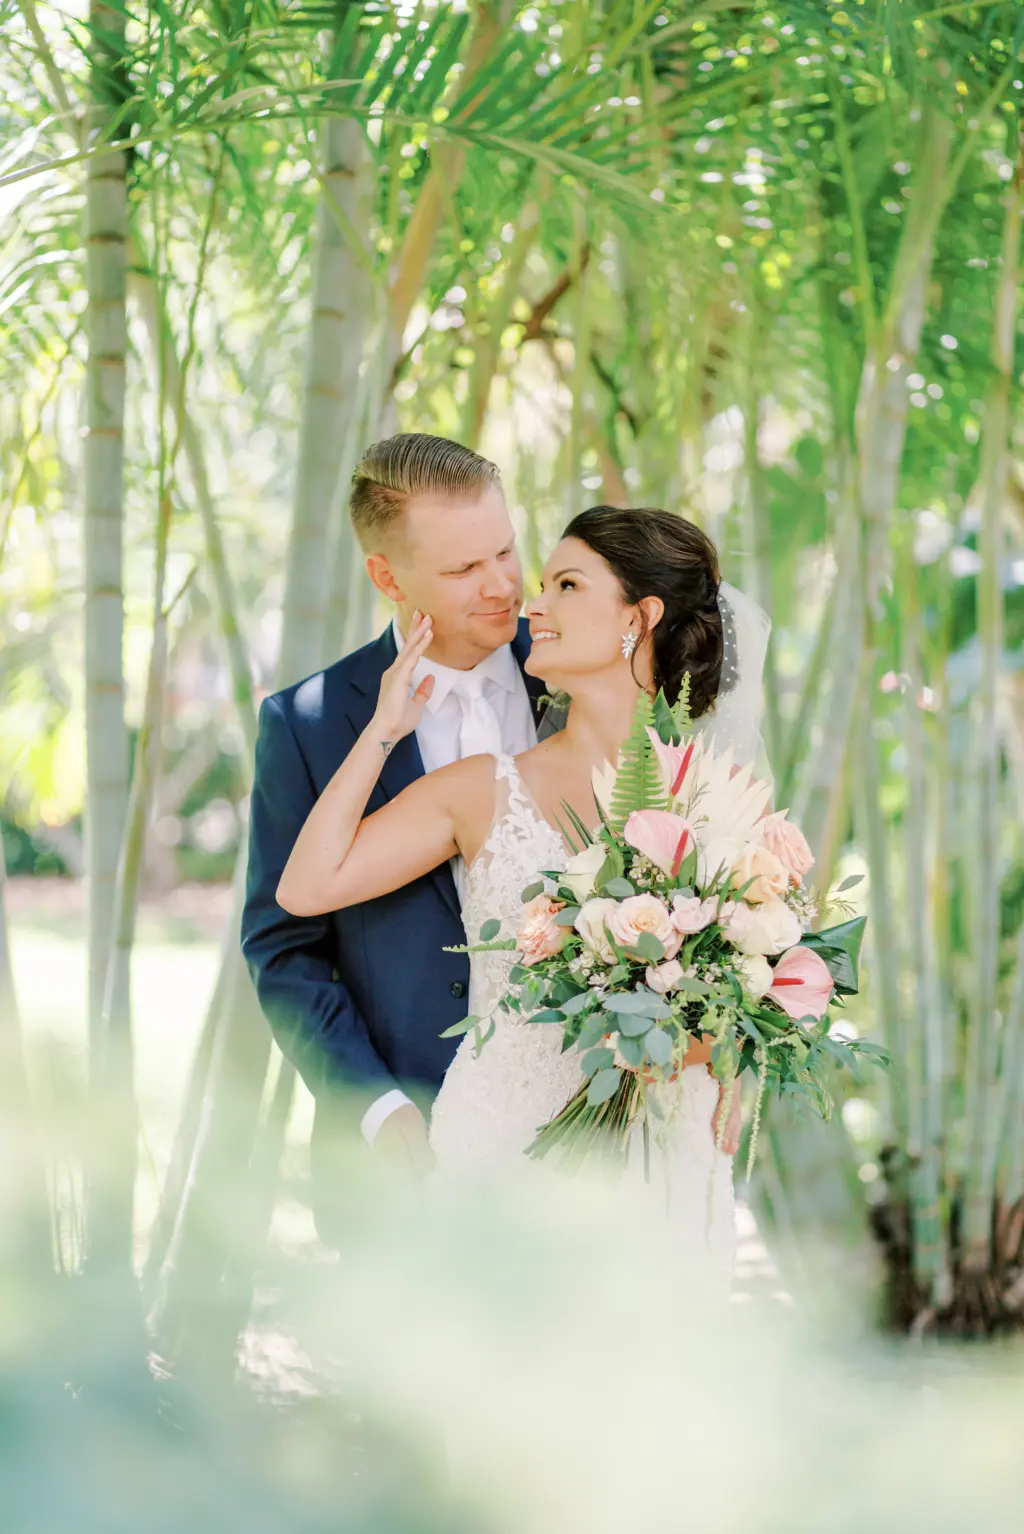 Bride and Groom Wedding Portrait | St. Pete Planner and Florist Lemon Drops Weddings and Events | Hair and Makeup Artist Femme Akoi Beauty Studio